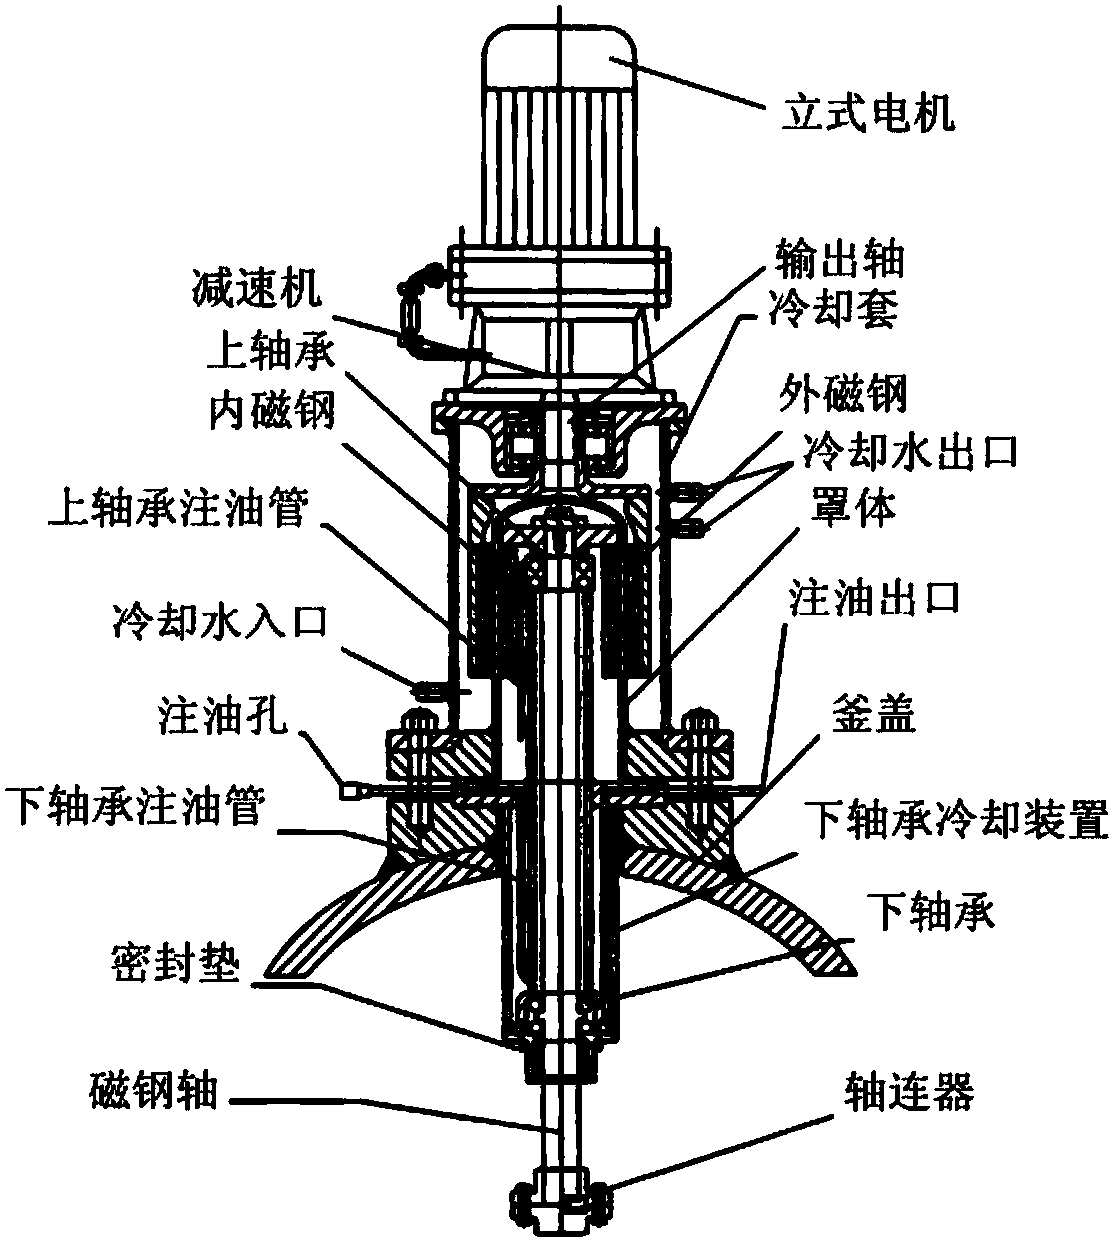 Chemical mechanical system with magnetic torque adjustable reactor